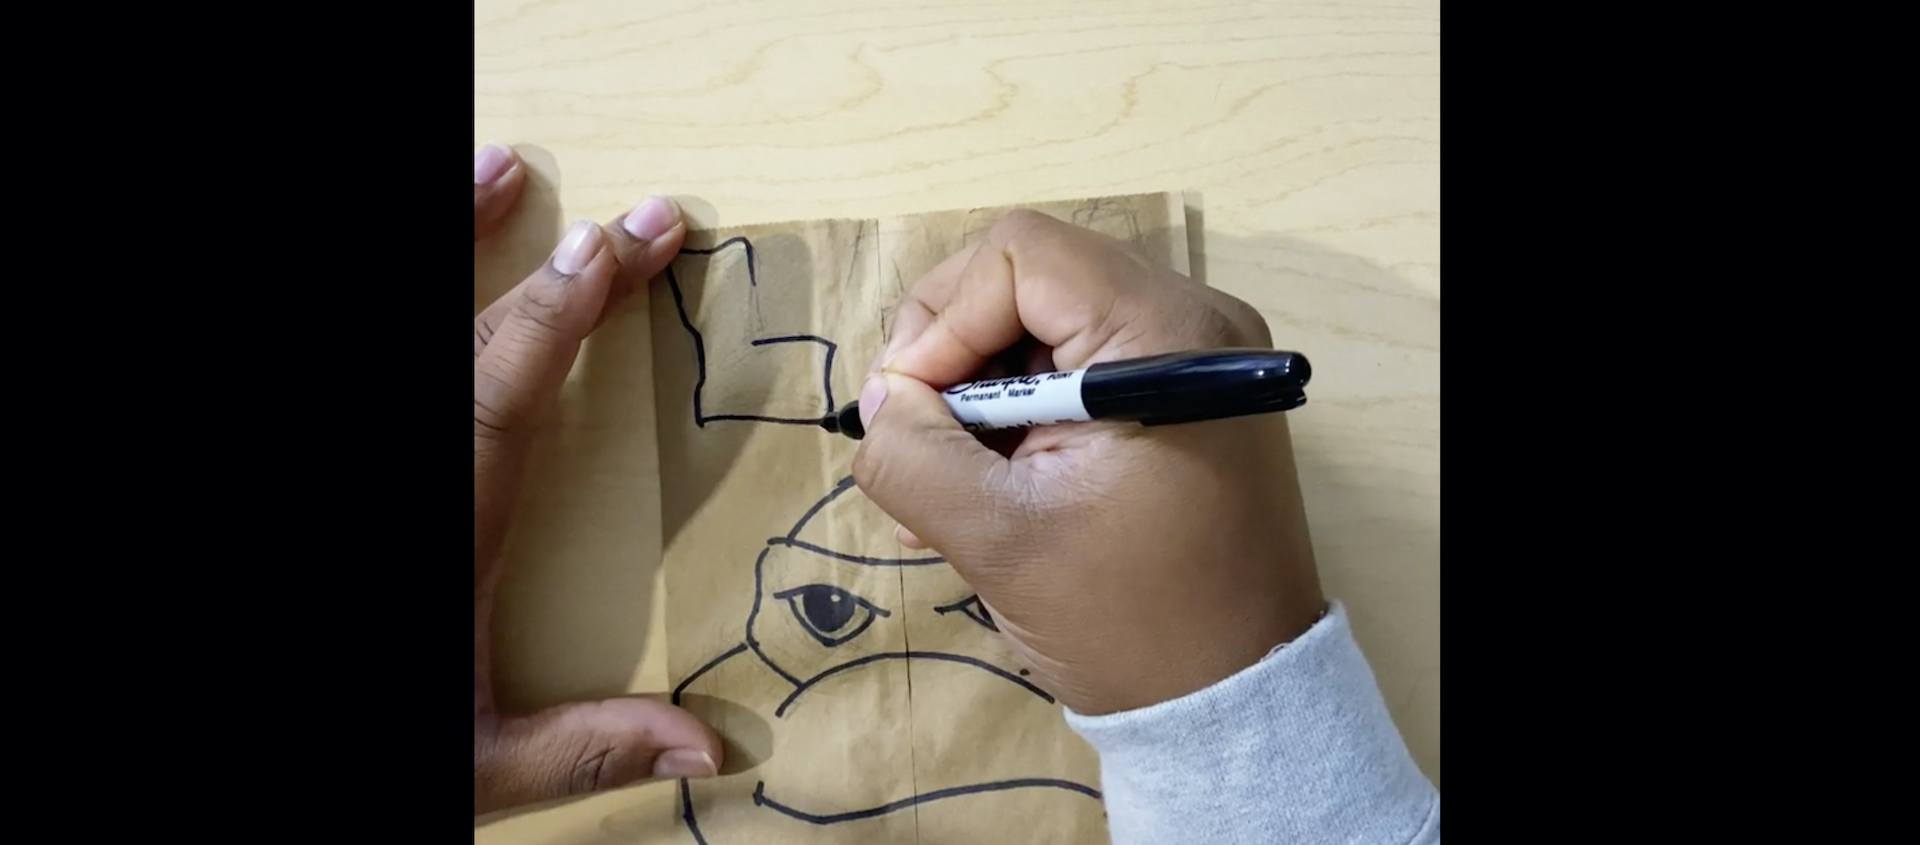 The hands of artist Alexander Chisley are seen drawing text with Sharpie marker above a drawing of a Teenage Mutant Ninja Turtle on a paper bag